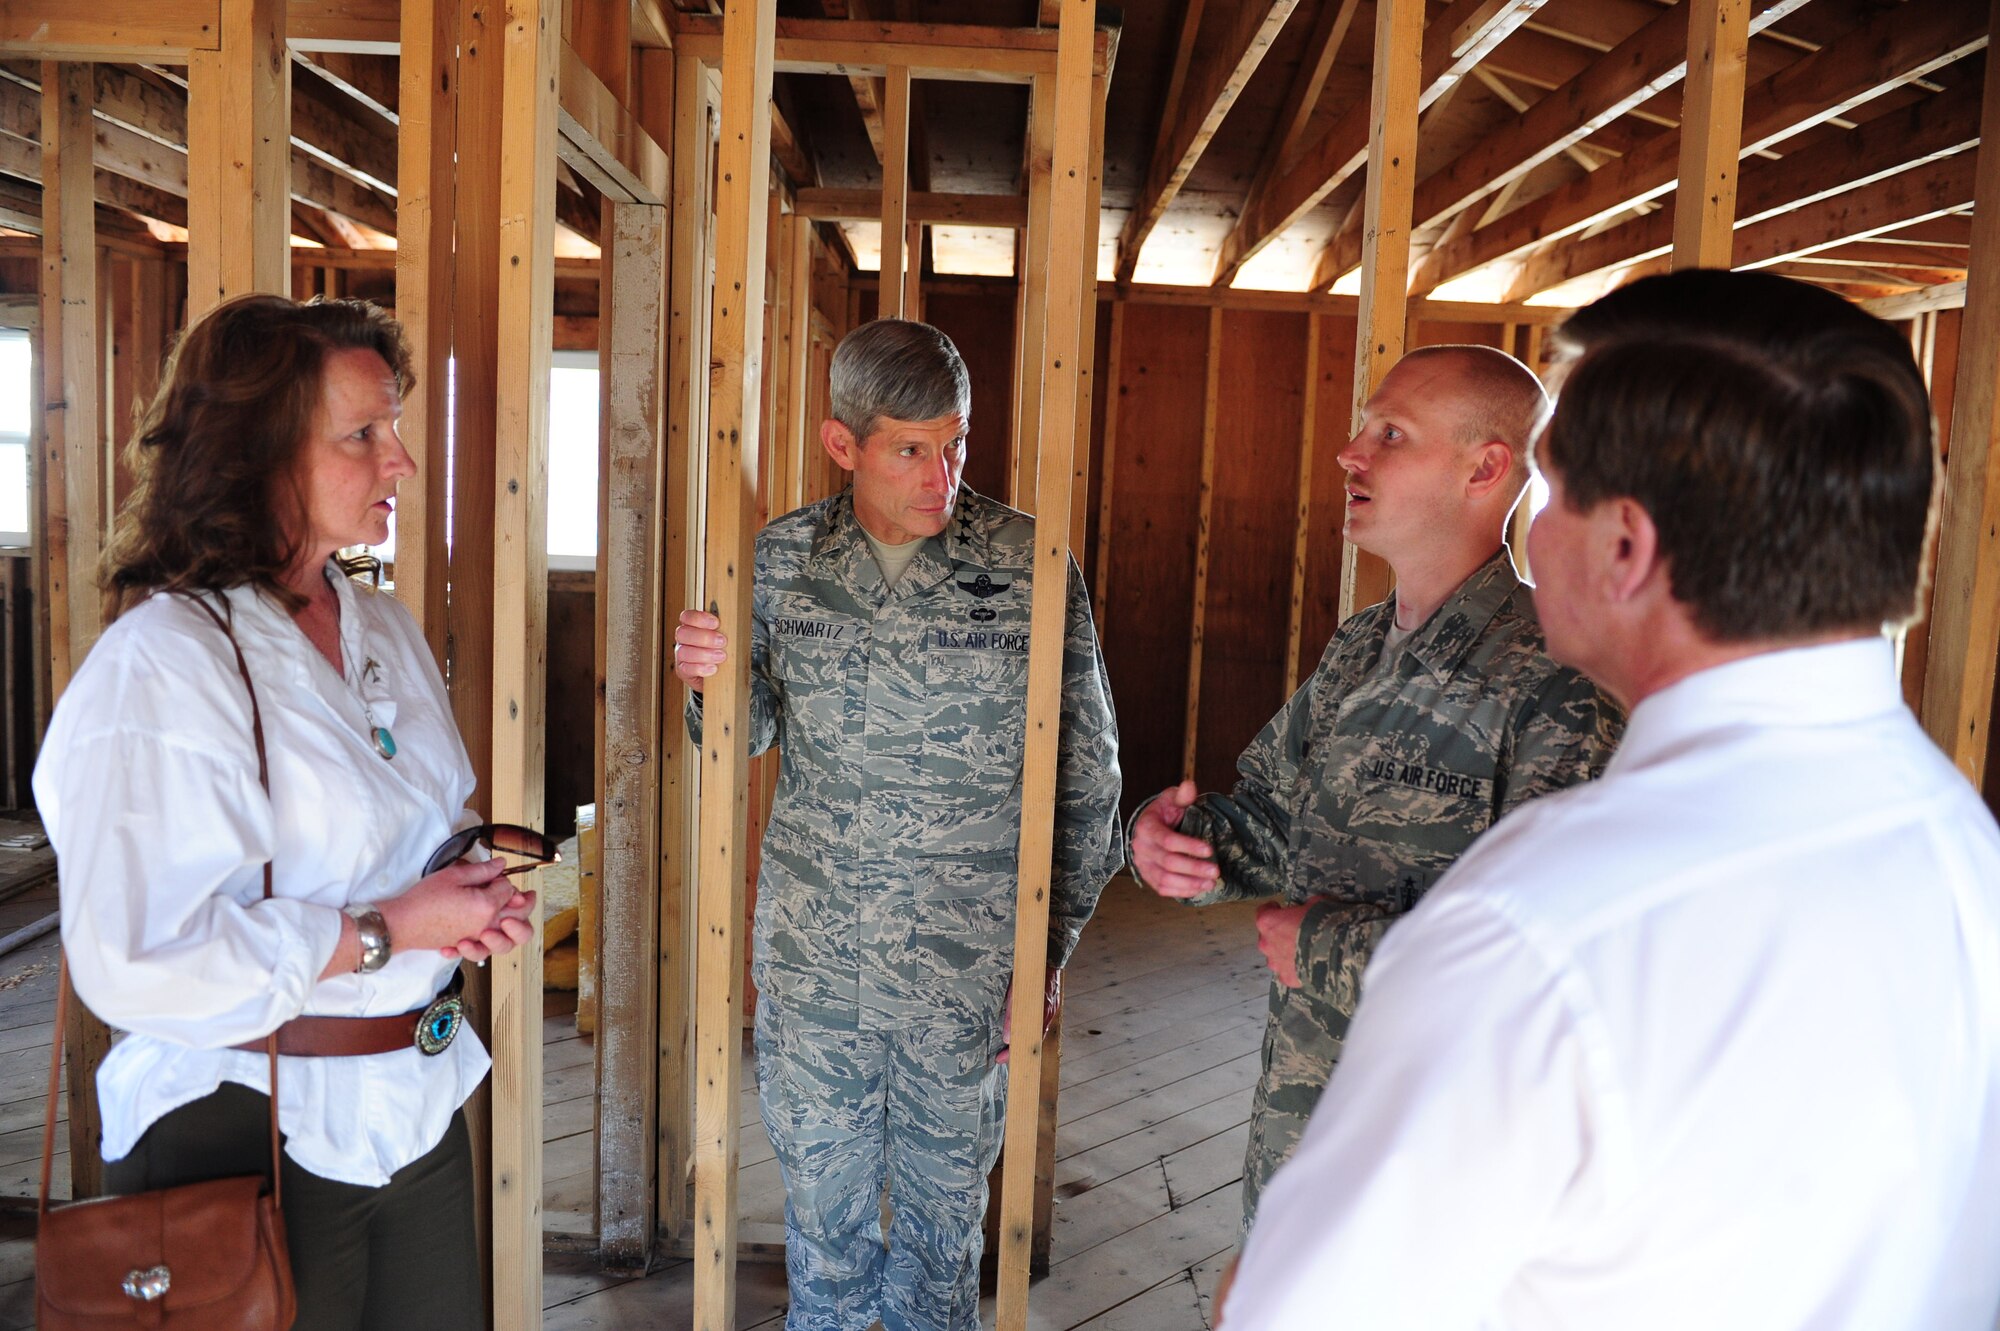 Tech. Sgt. Robert Horn briefs Air Force Chief of Staff Gen. Norton Schwartz and local civic leaders Oct. 4, 2011, in Minot N.D., during a visit to Horn's flood-ravaged home. Schwartz visited the Horn family to see the flood areas in Minot and how the Airmen are recovering. Horn is an ICBM weapon system controller assigned to the 91st Operation Support Squadron. (U.S. Air Force photo/Senior Airman Michael Veloz)